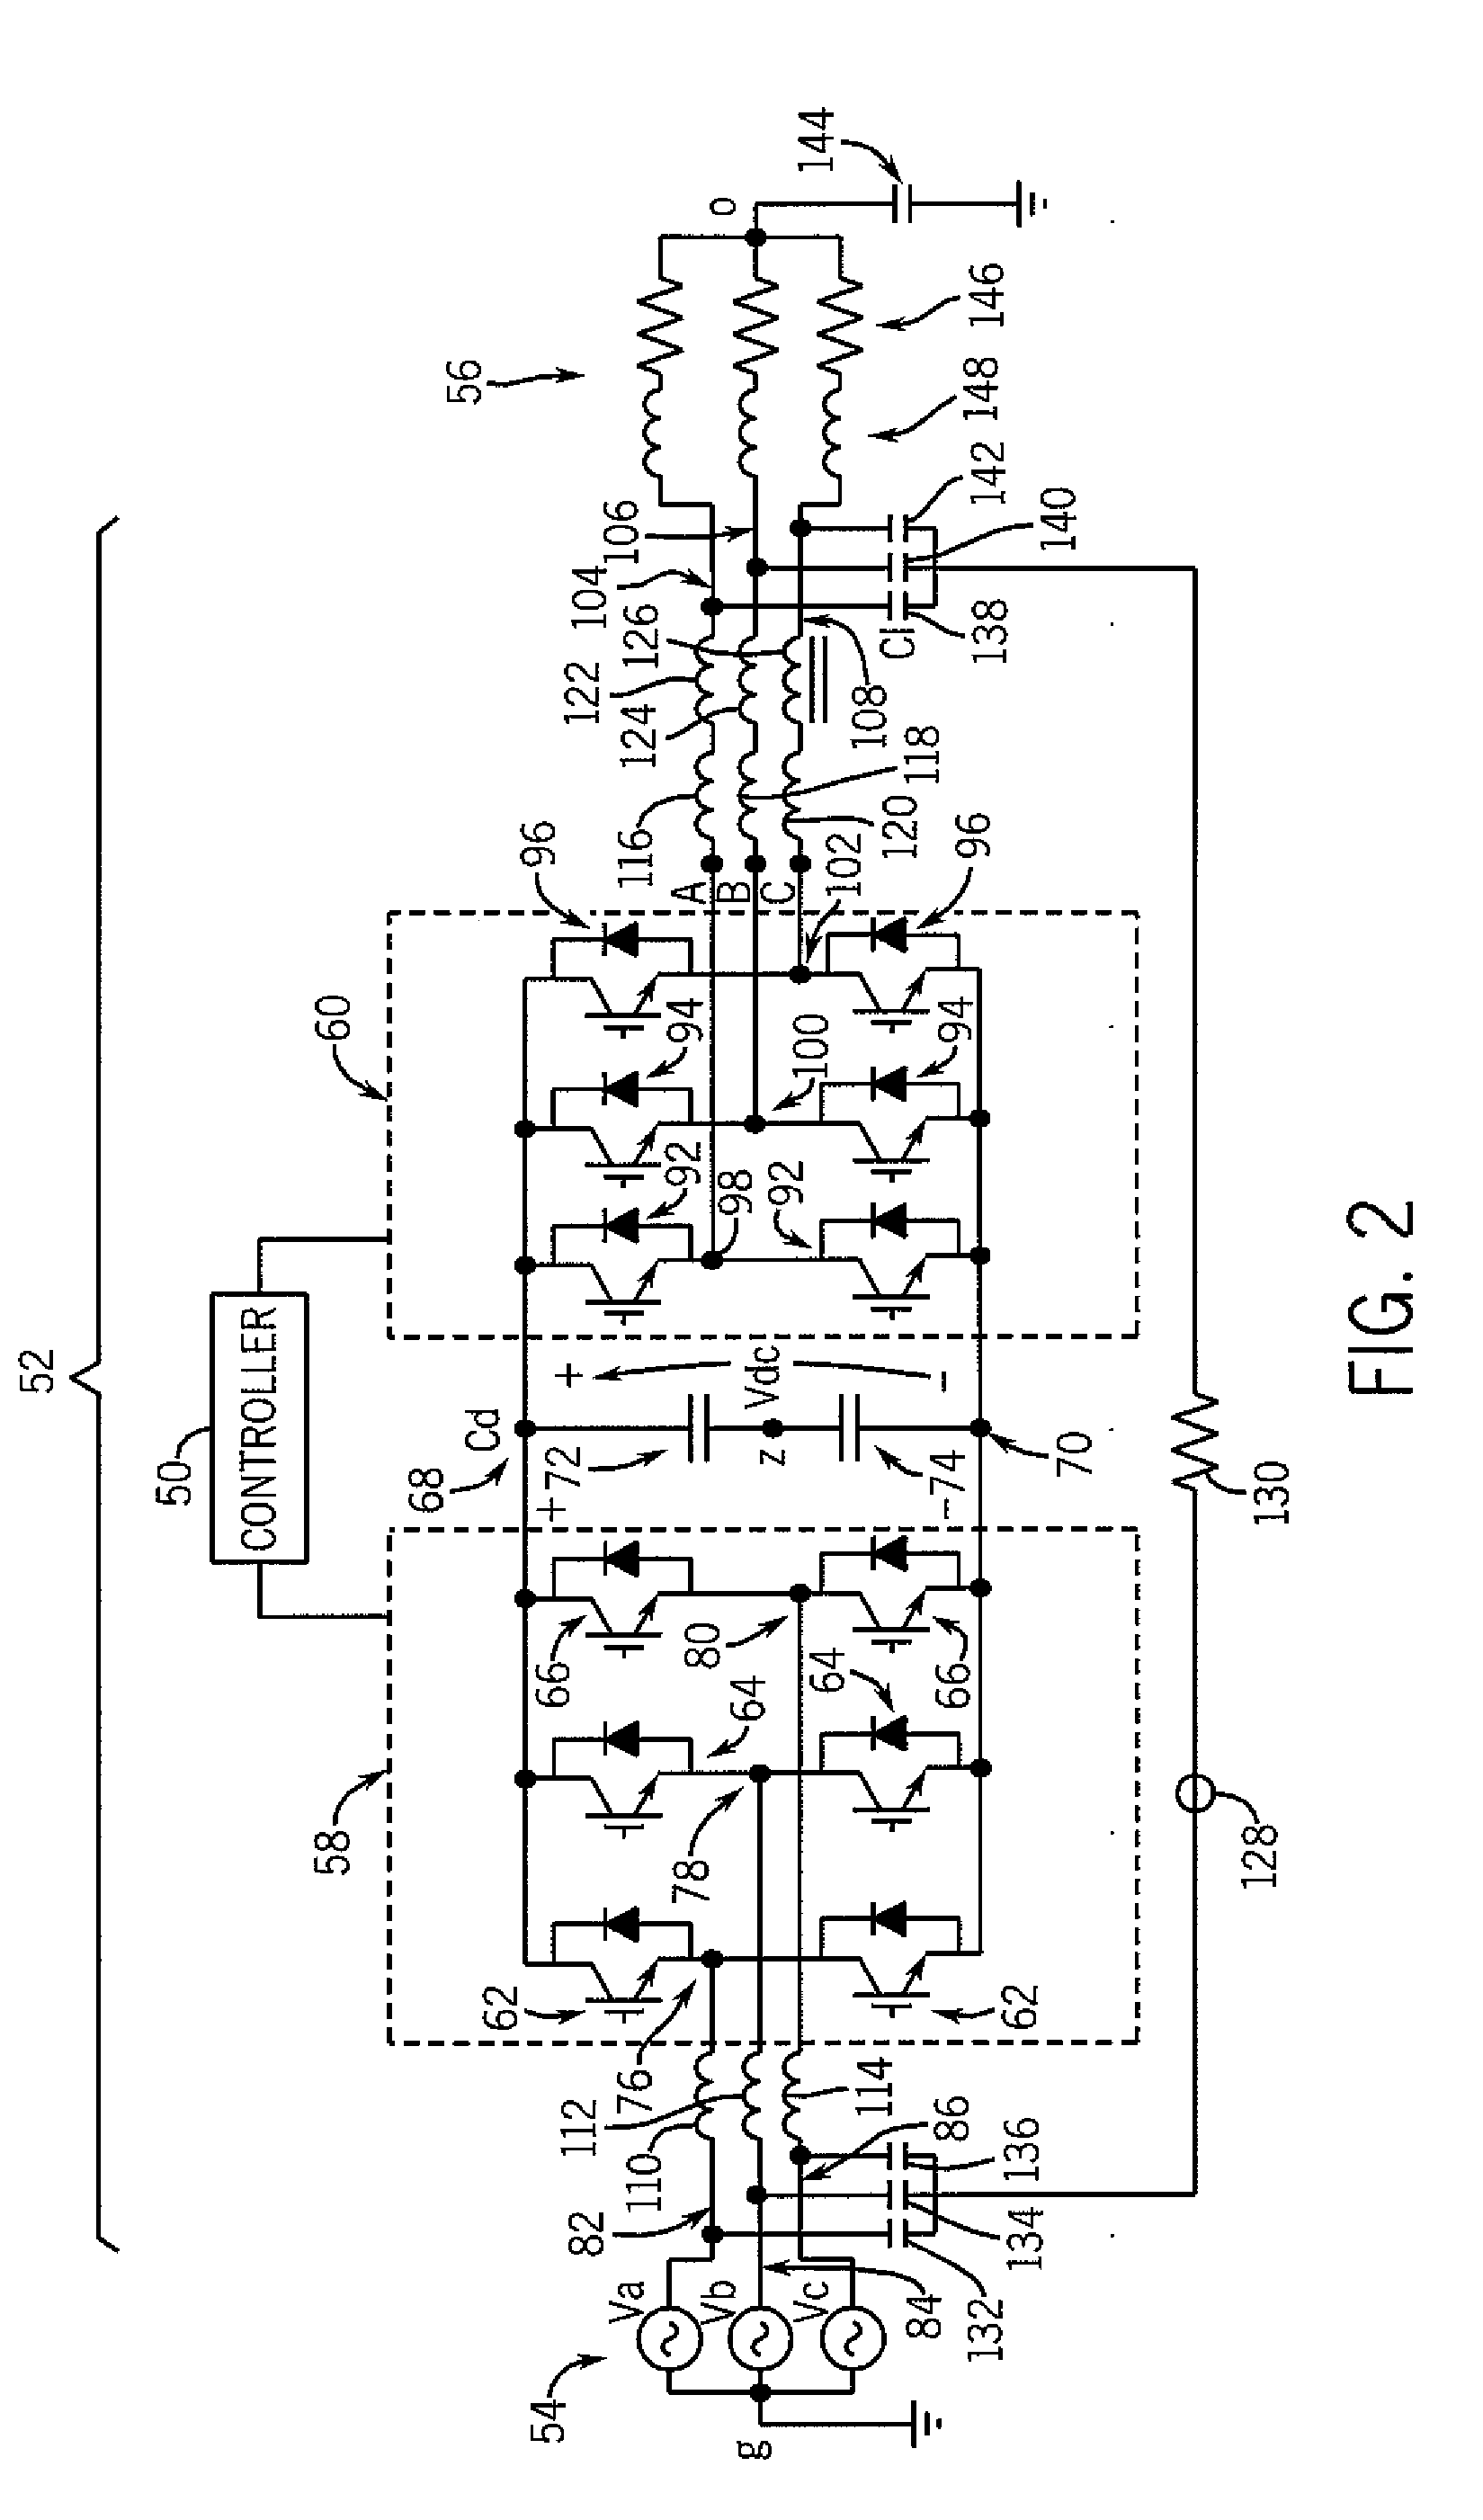 Power converter with reduced common mode voltage